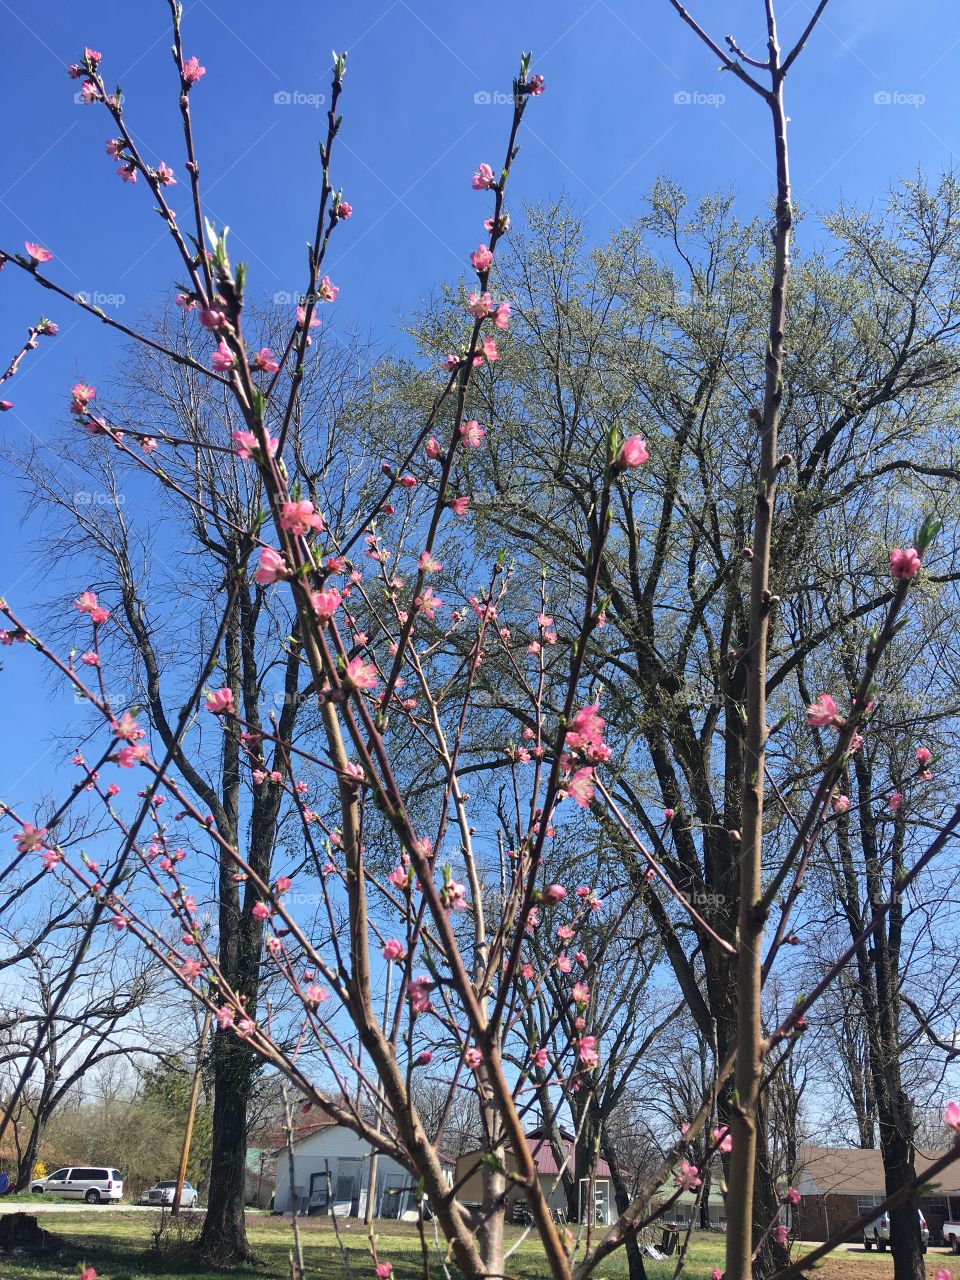 My peach tree with all its blooms, in just a short few months there will be peaches!